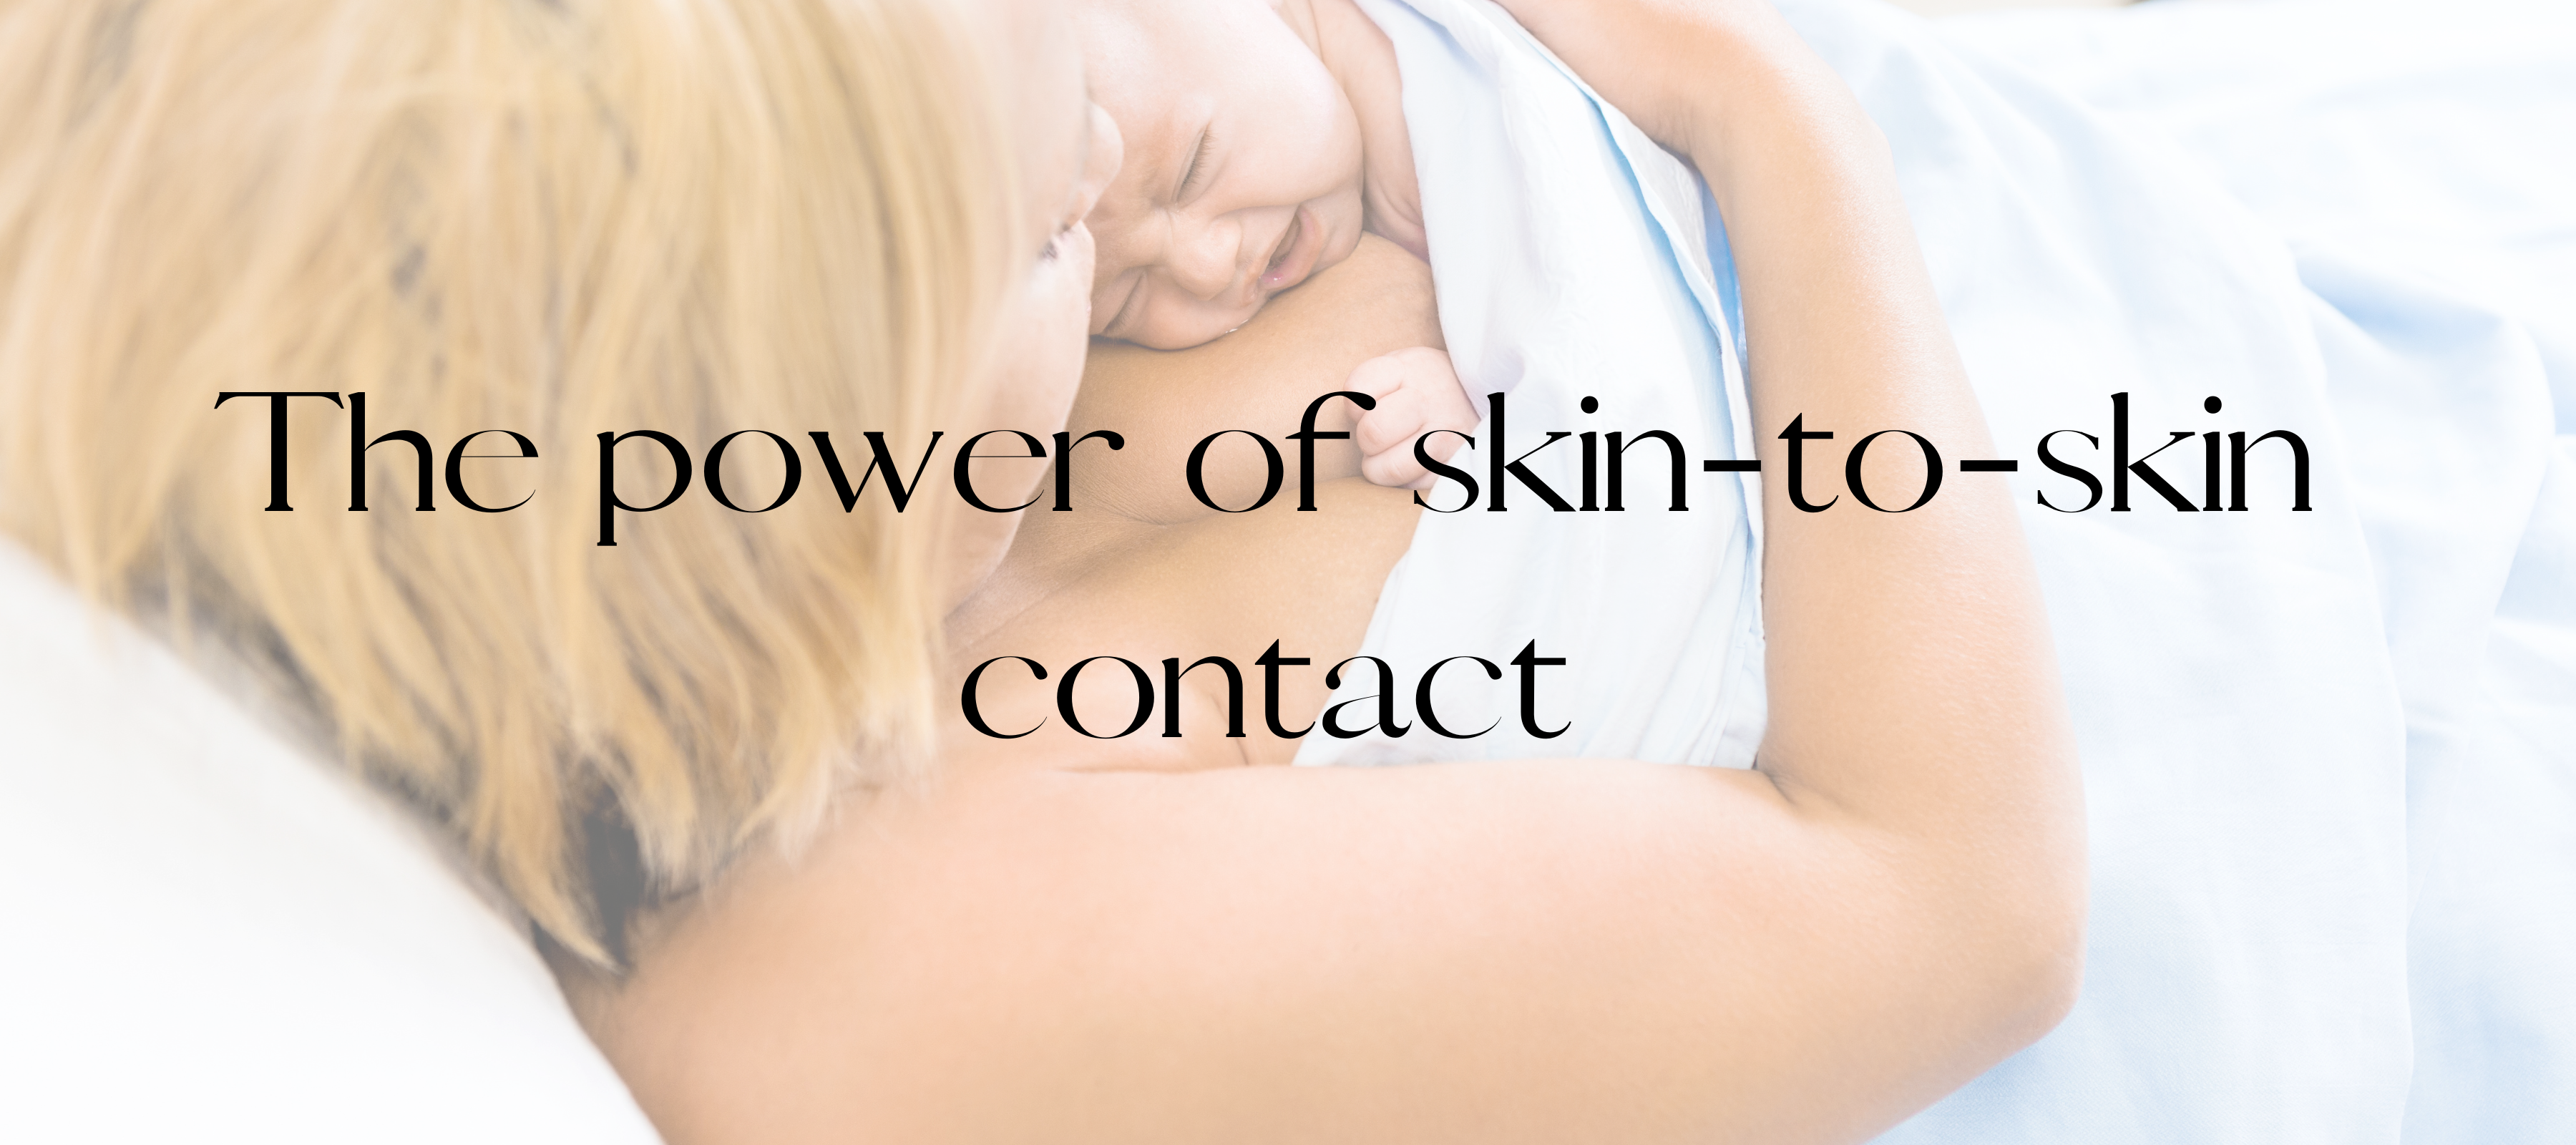 The power of skin-to-skin contact